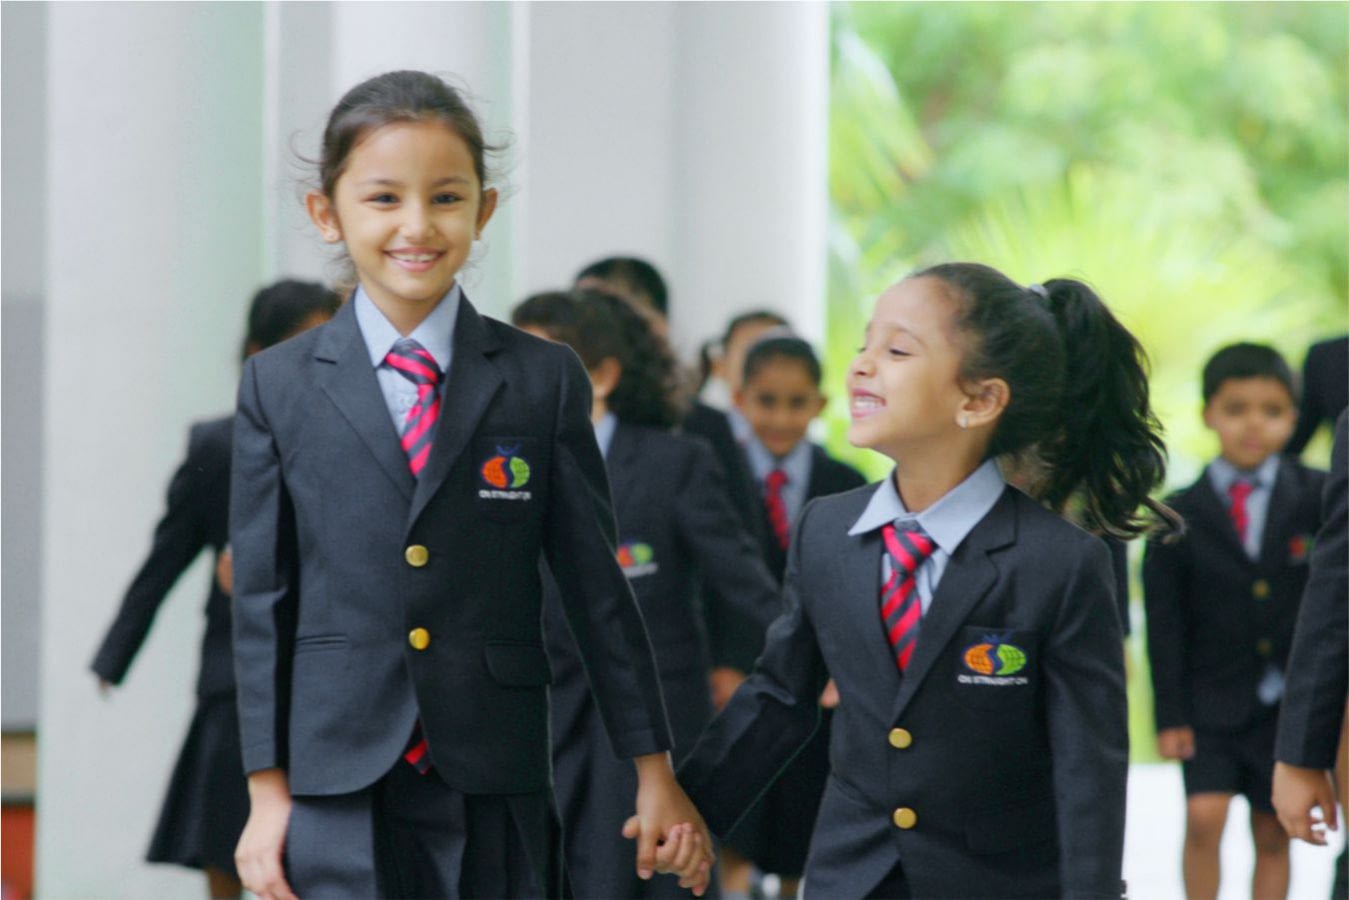 Cambridge Assessment International Education in India.jpg Are you looking for the Cambridge international school in India? Then you need not to worry, asSSVM World School offers many facilities and educational solutions for their students. Check their website now! https://ssvmwscambridge.com/ by ssvmwscambridge